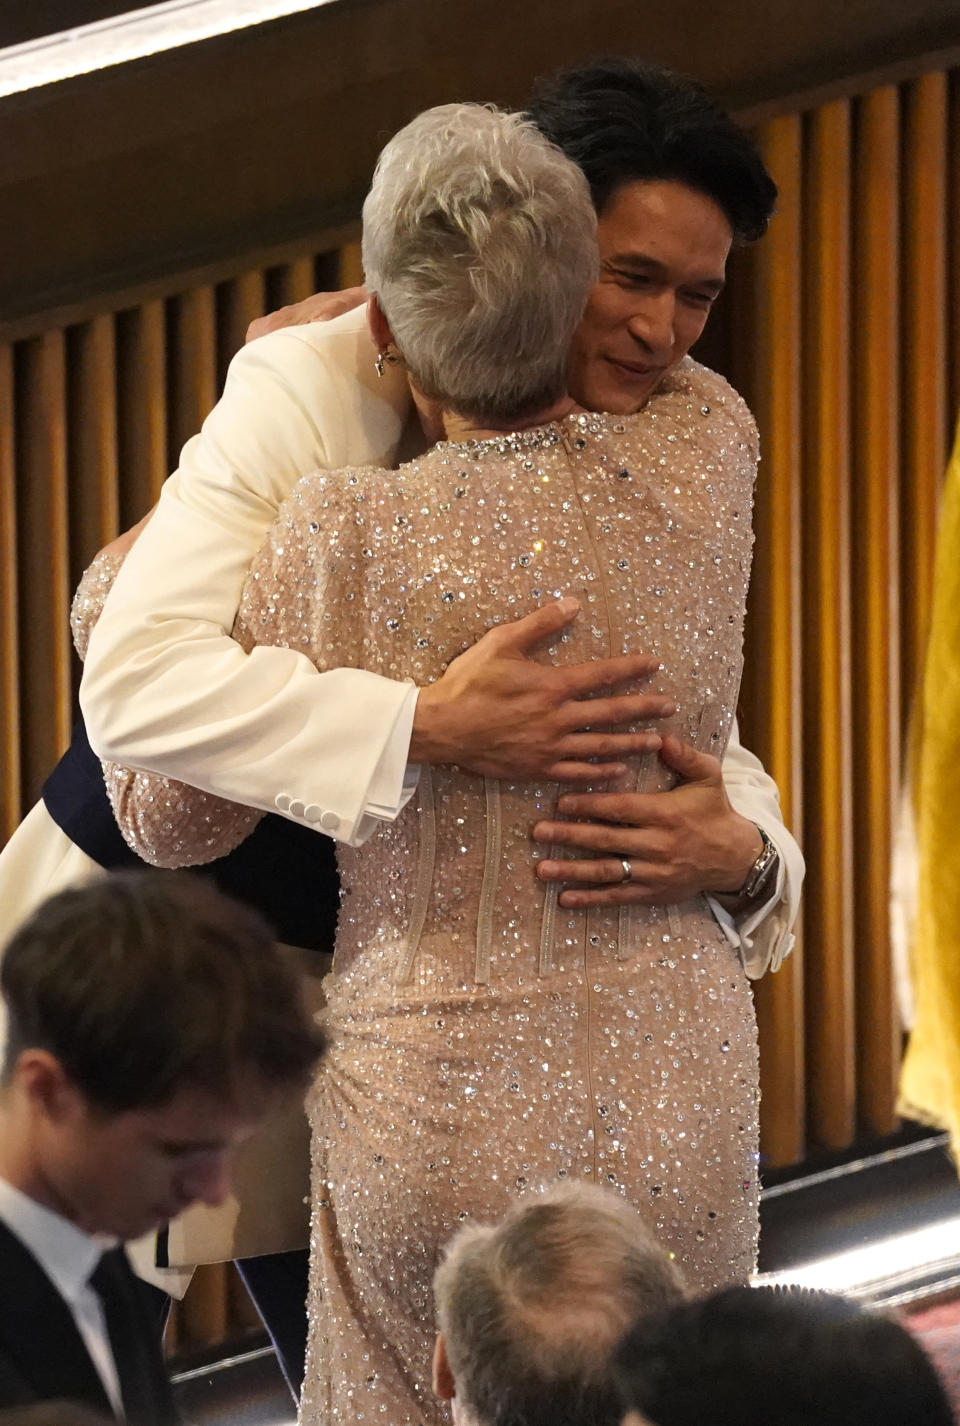 Harry Shum Jr., left, hugs Jamie Lee Curtis in the audience at the Oscars on Sunday, March 12, 2023, at the Dolby Theatre in Los Angeles. (AP Photo/Chris Pizzello)